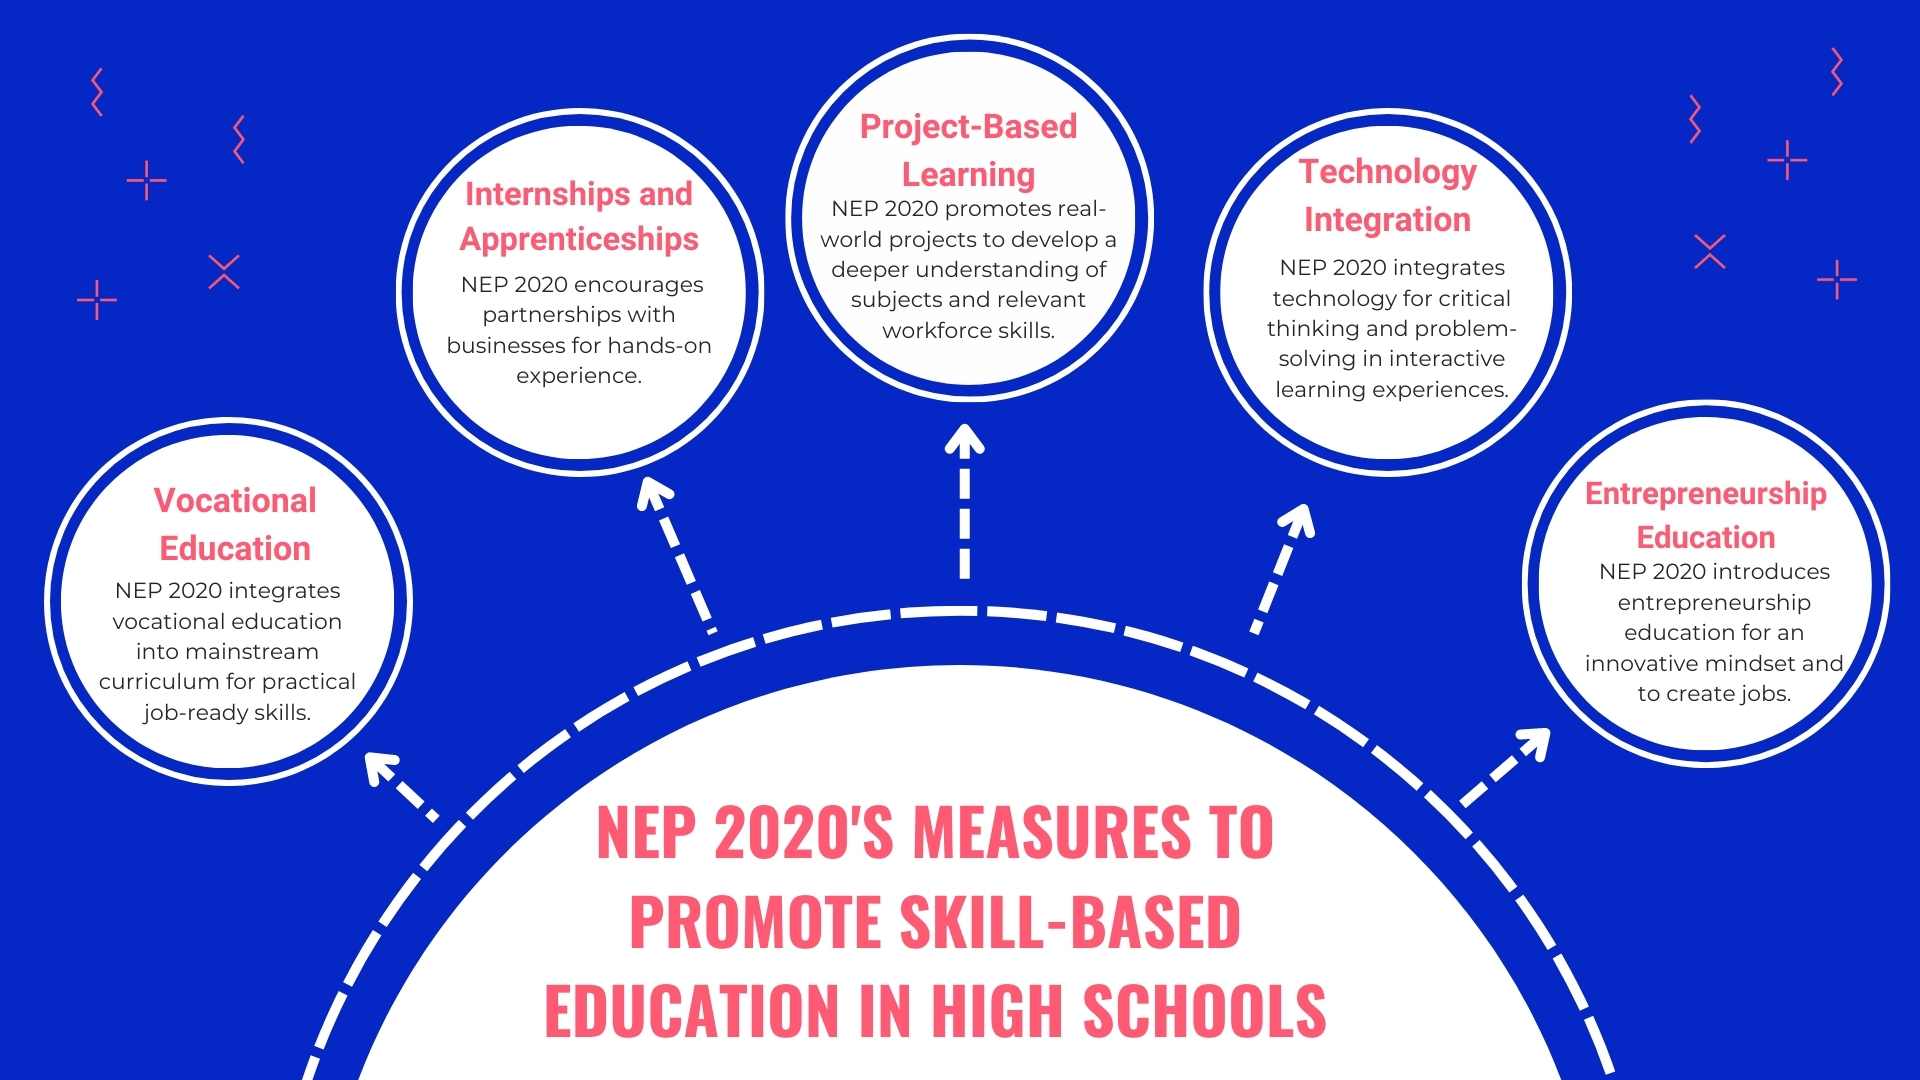 NEP 2020's Measures to Promote Skill-based education in High Schools